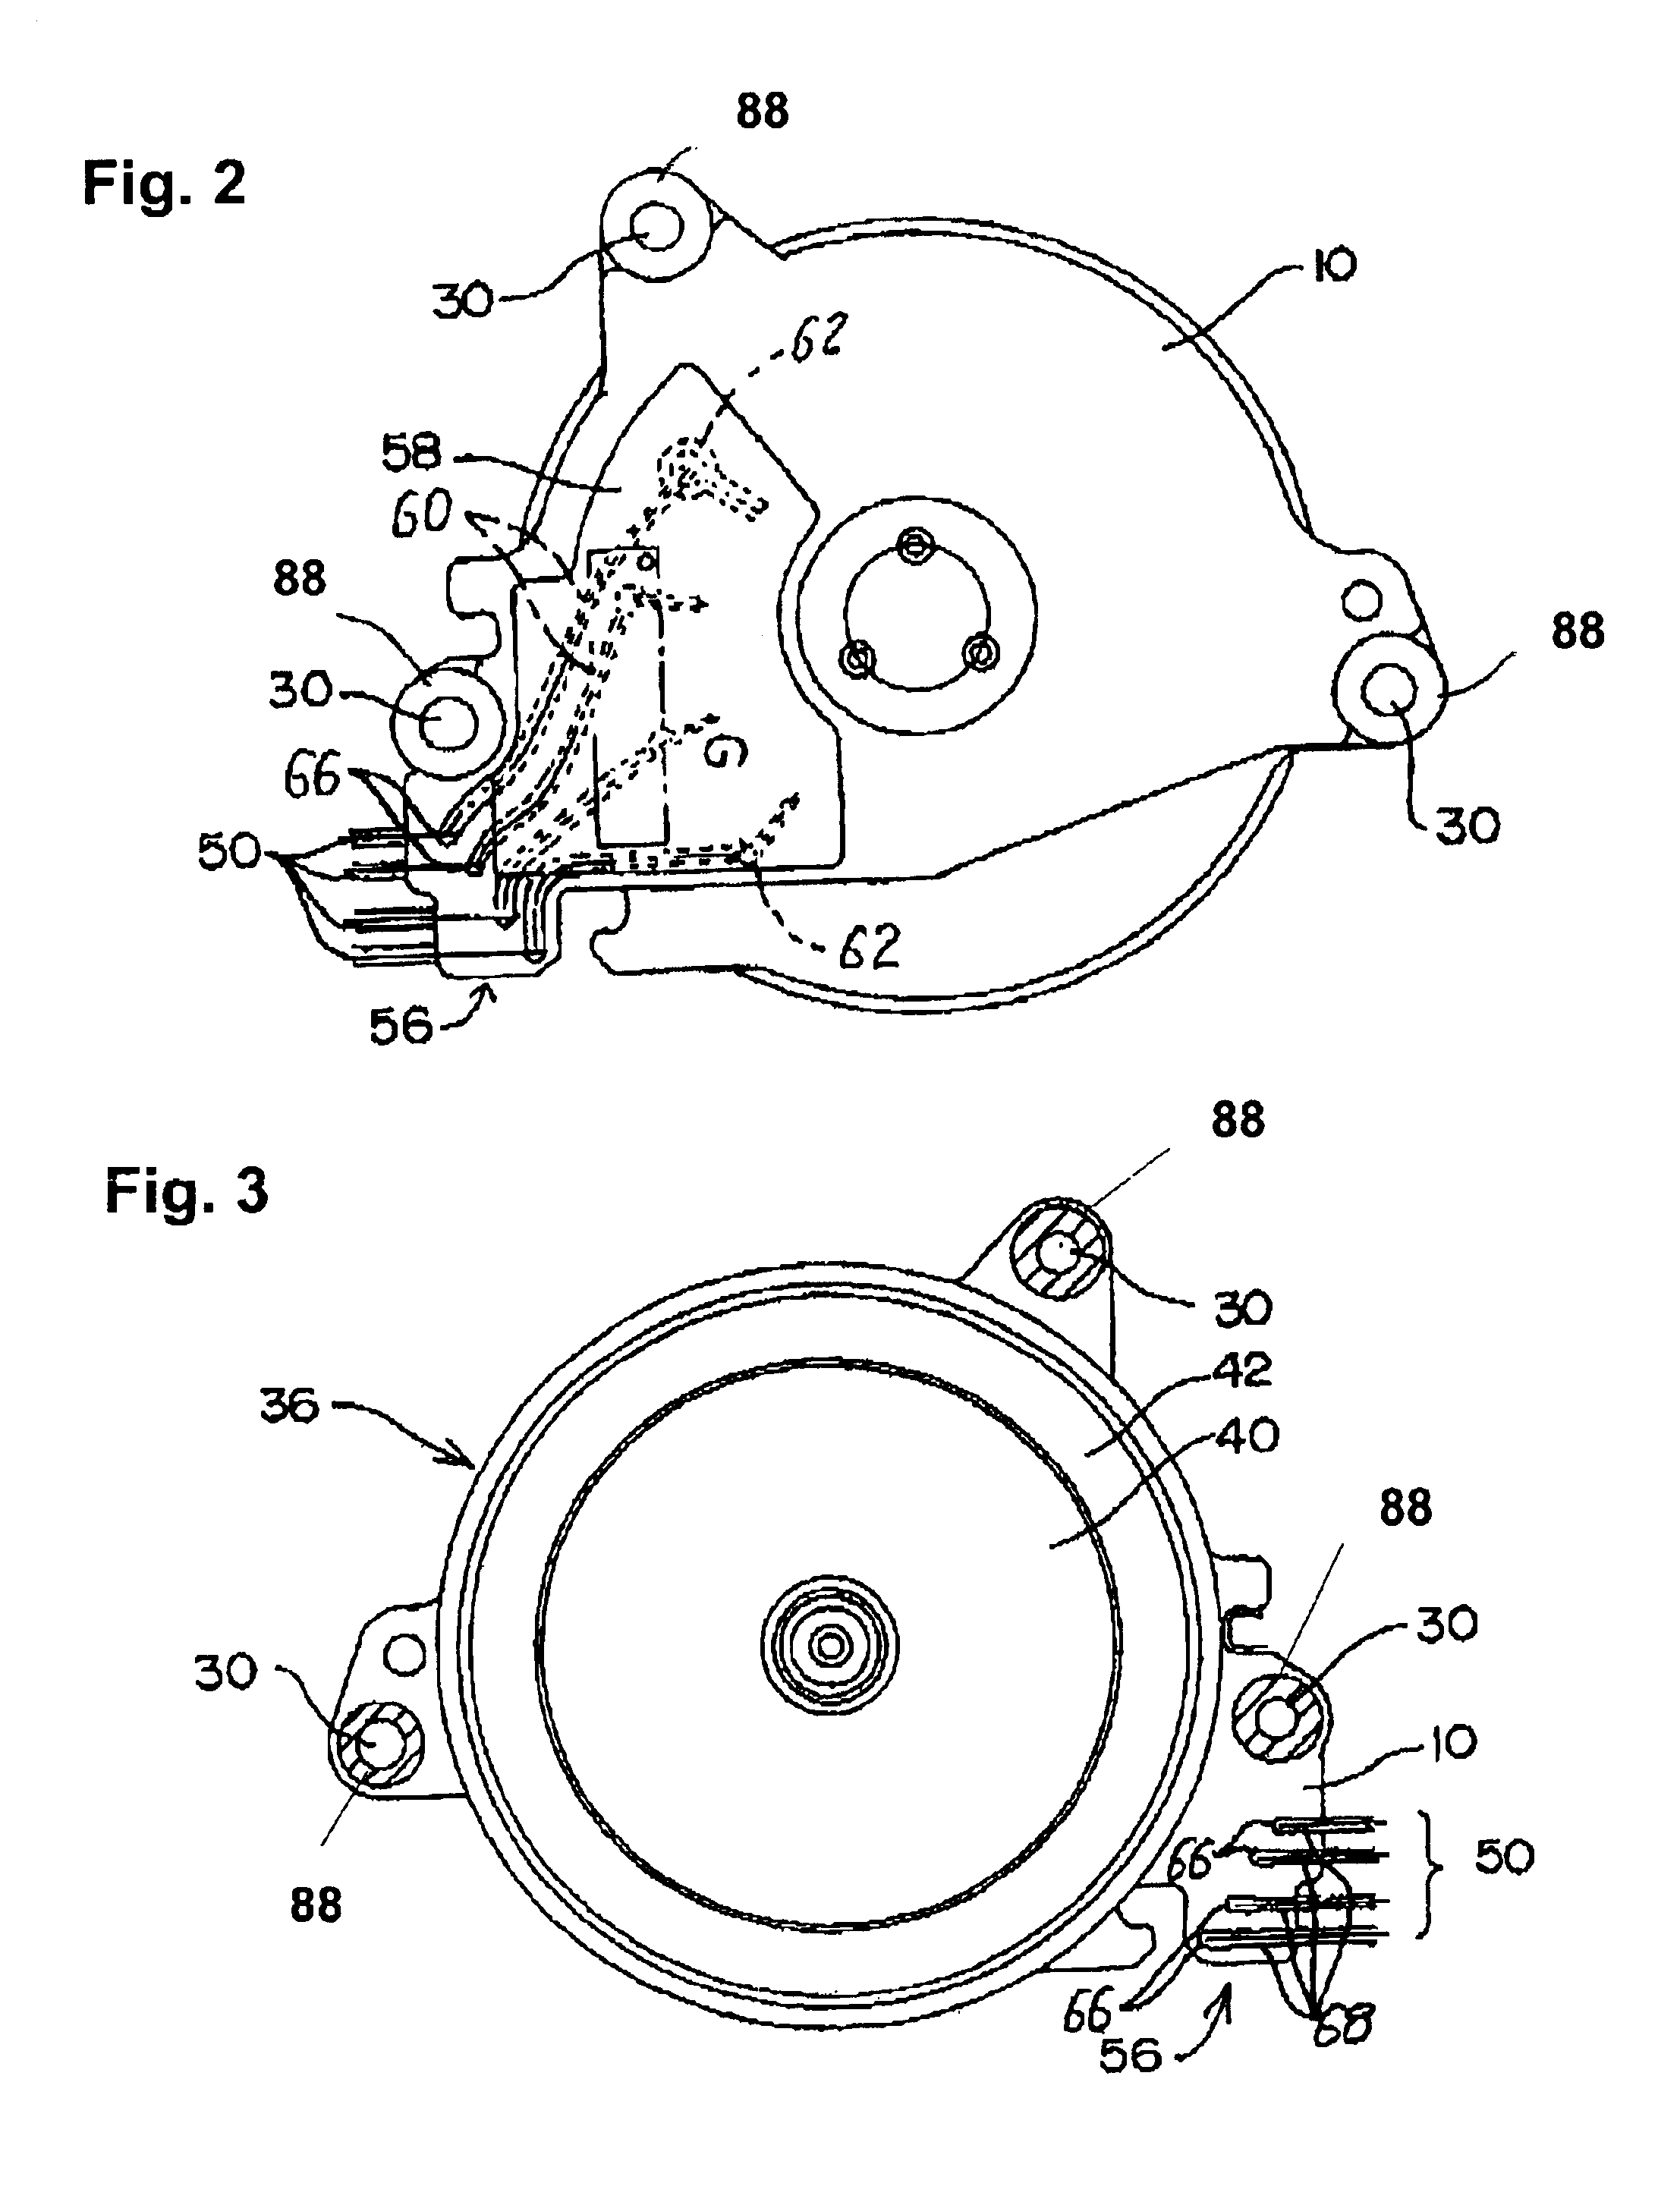 Motor with resin base plate